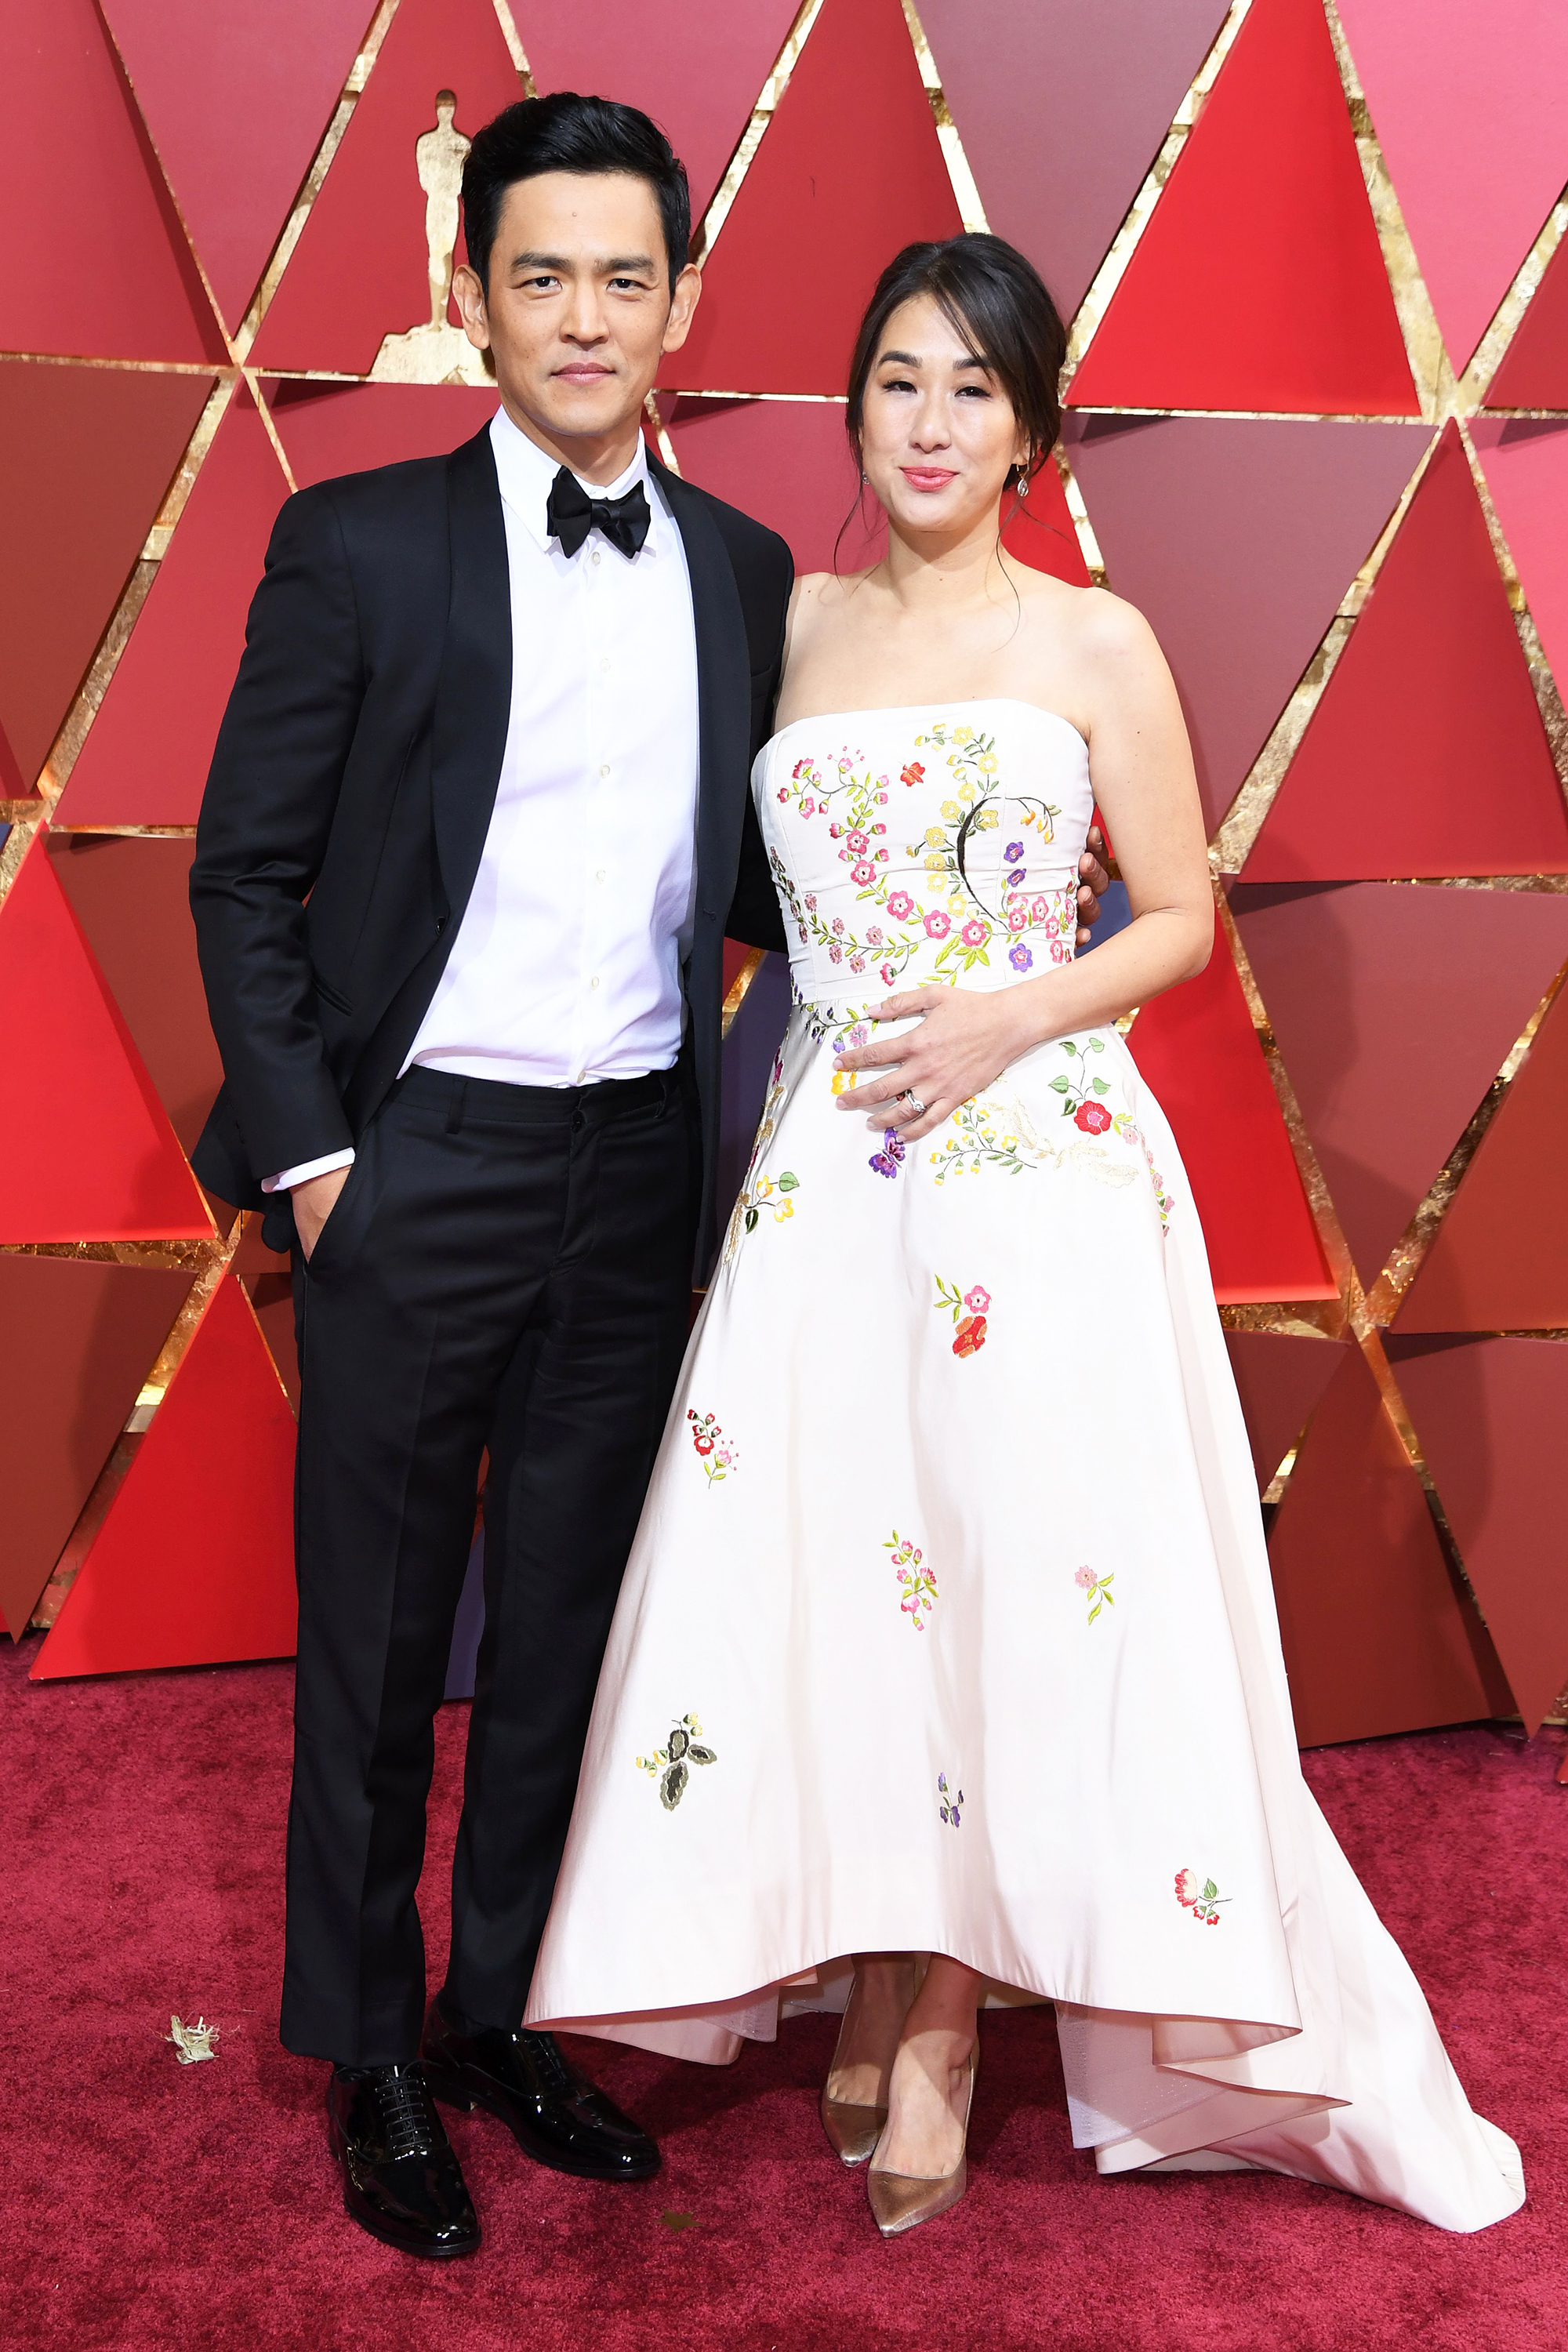 Kerri Higuchi and John Cho on the red carpet for the 89th Oscars, on Feb. 26, 2017 in Hollywood, Calif.